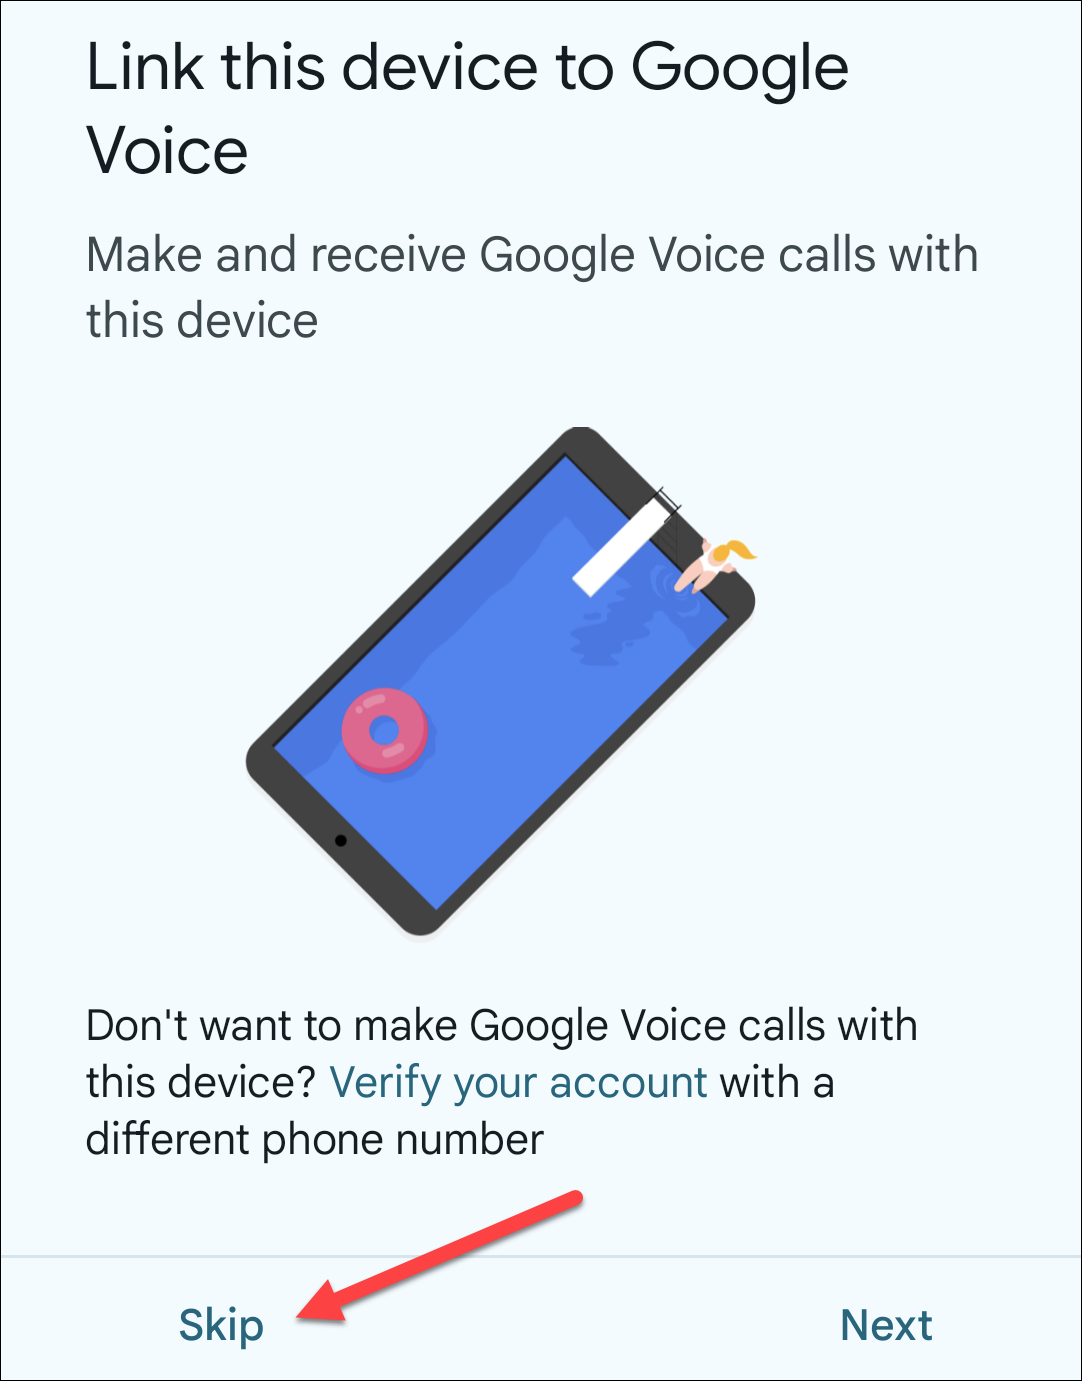 Skip linking device to Google Voice.